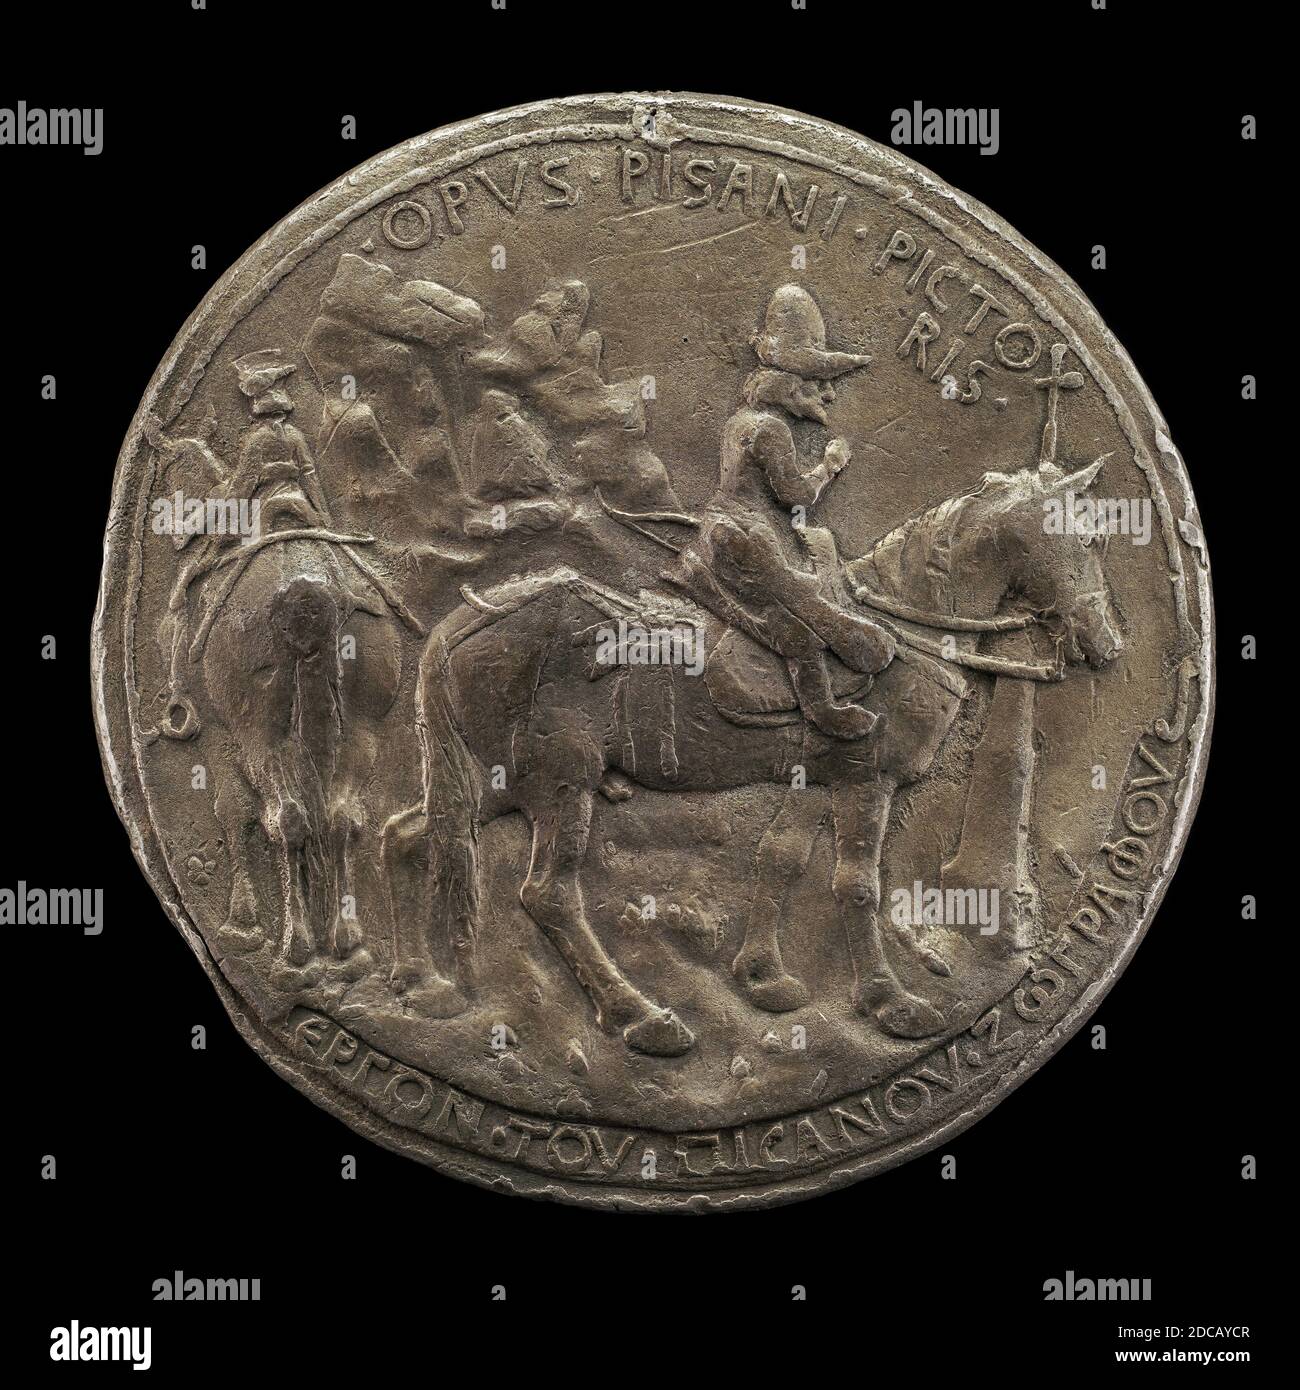 Pisanello, (artist), Veronese, c. 1395 - 1455, John VIII Riding in a Rocky Landscape, 1438, lead/Trial cast, possibly, overall (diameter): 10.38 cm (4 1/16 in.), gross weight: 421.59 gr (0.929 lb.), axis: 11:00 Stock Photo